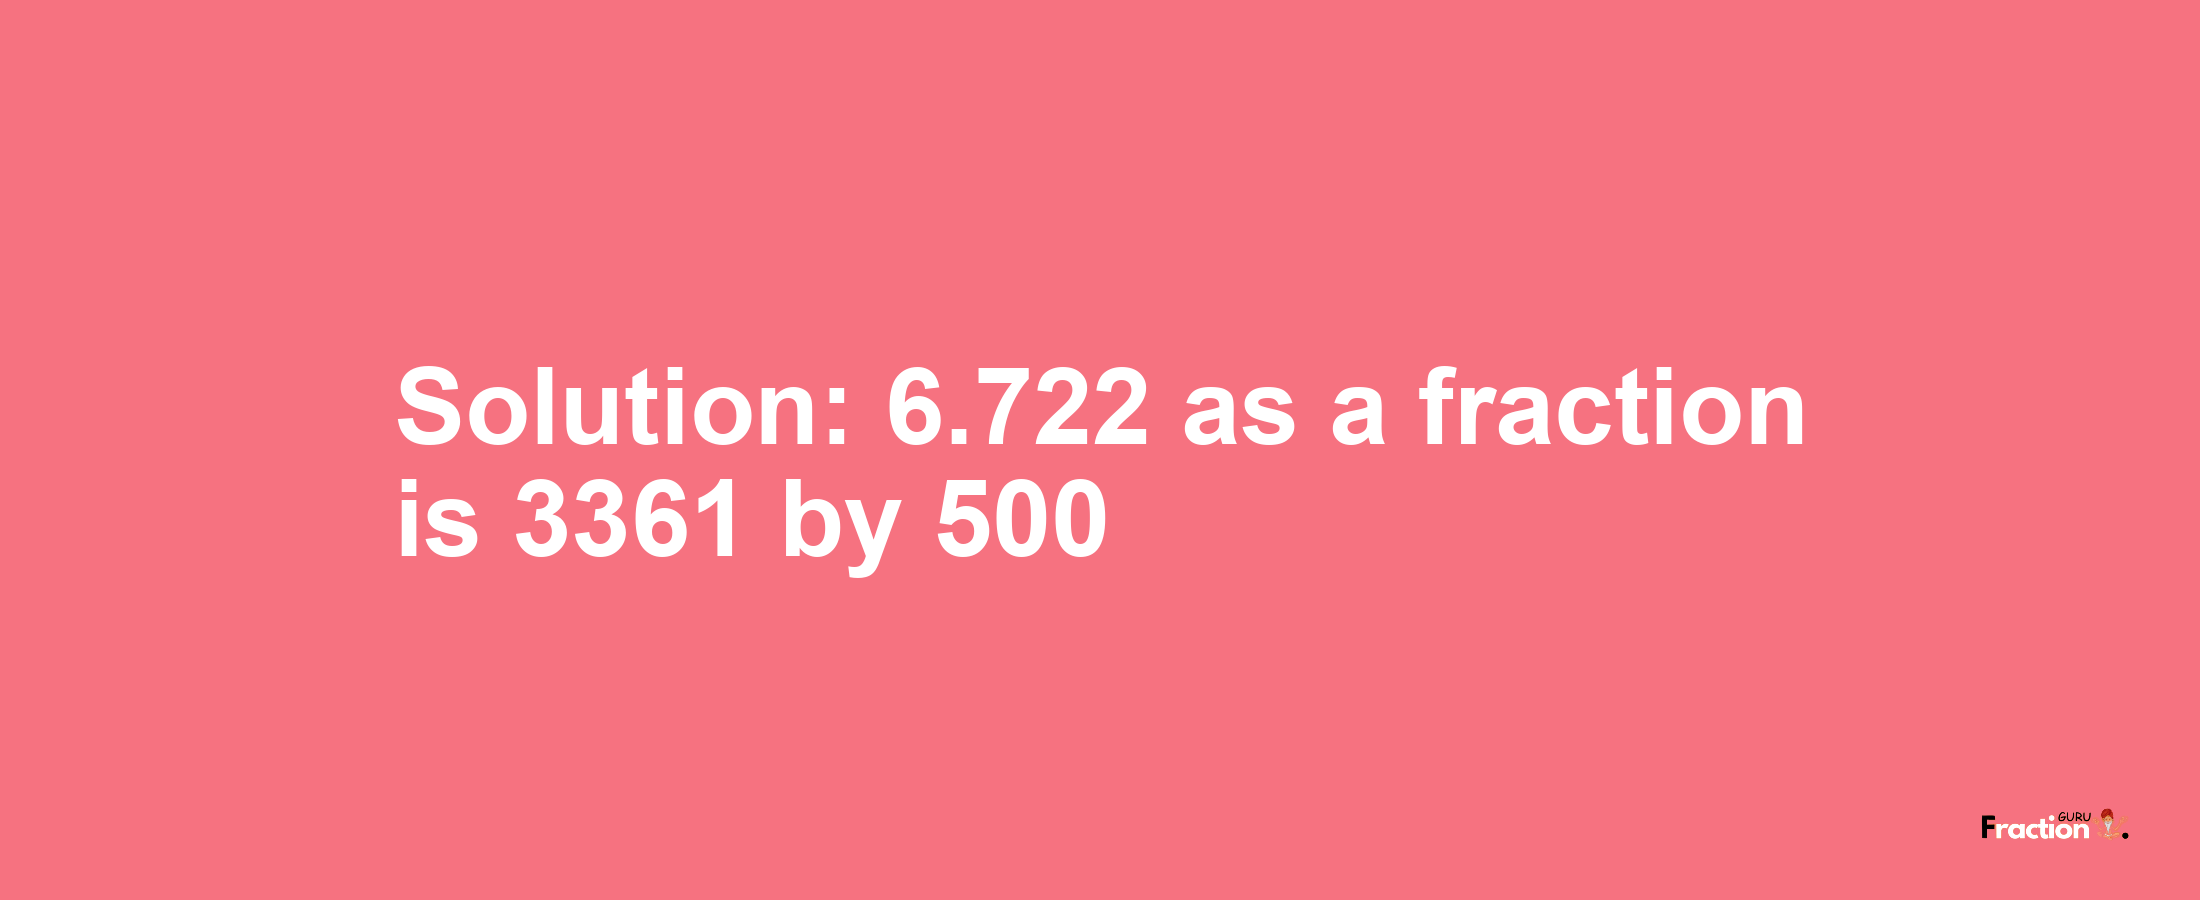 Solution:6.722 as a fraction is 3361/500